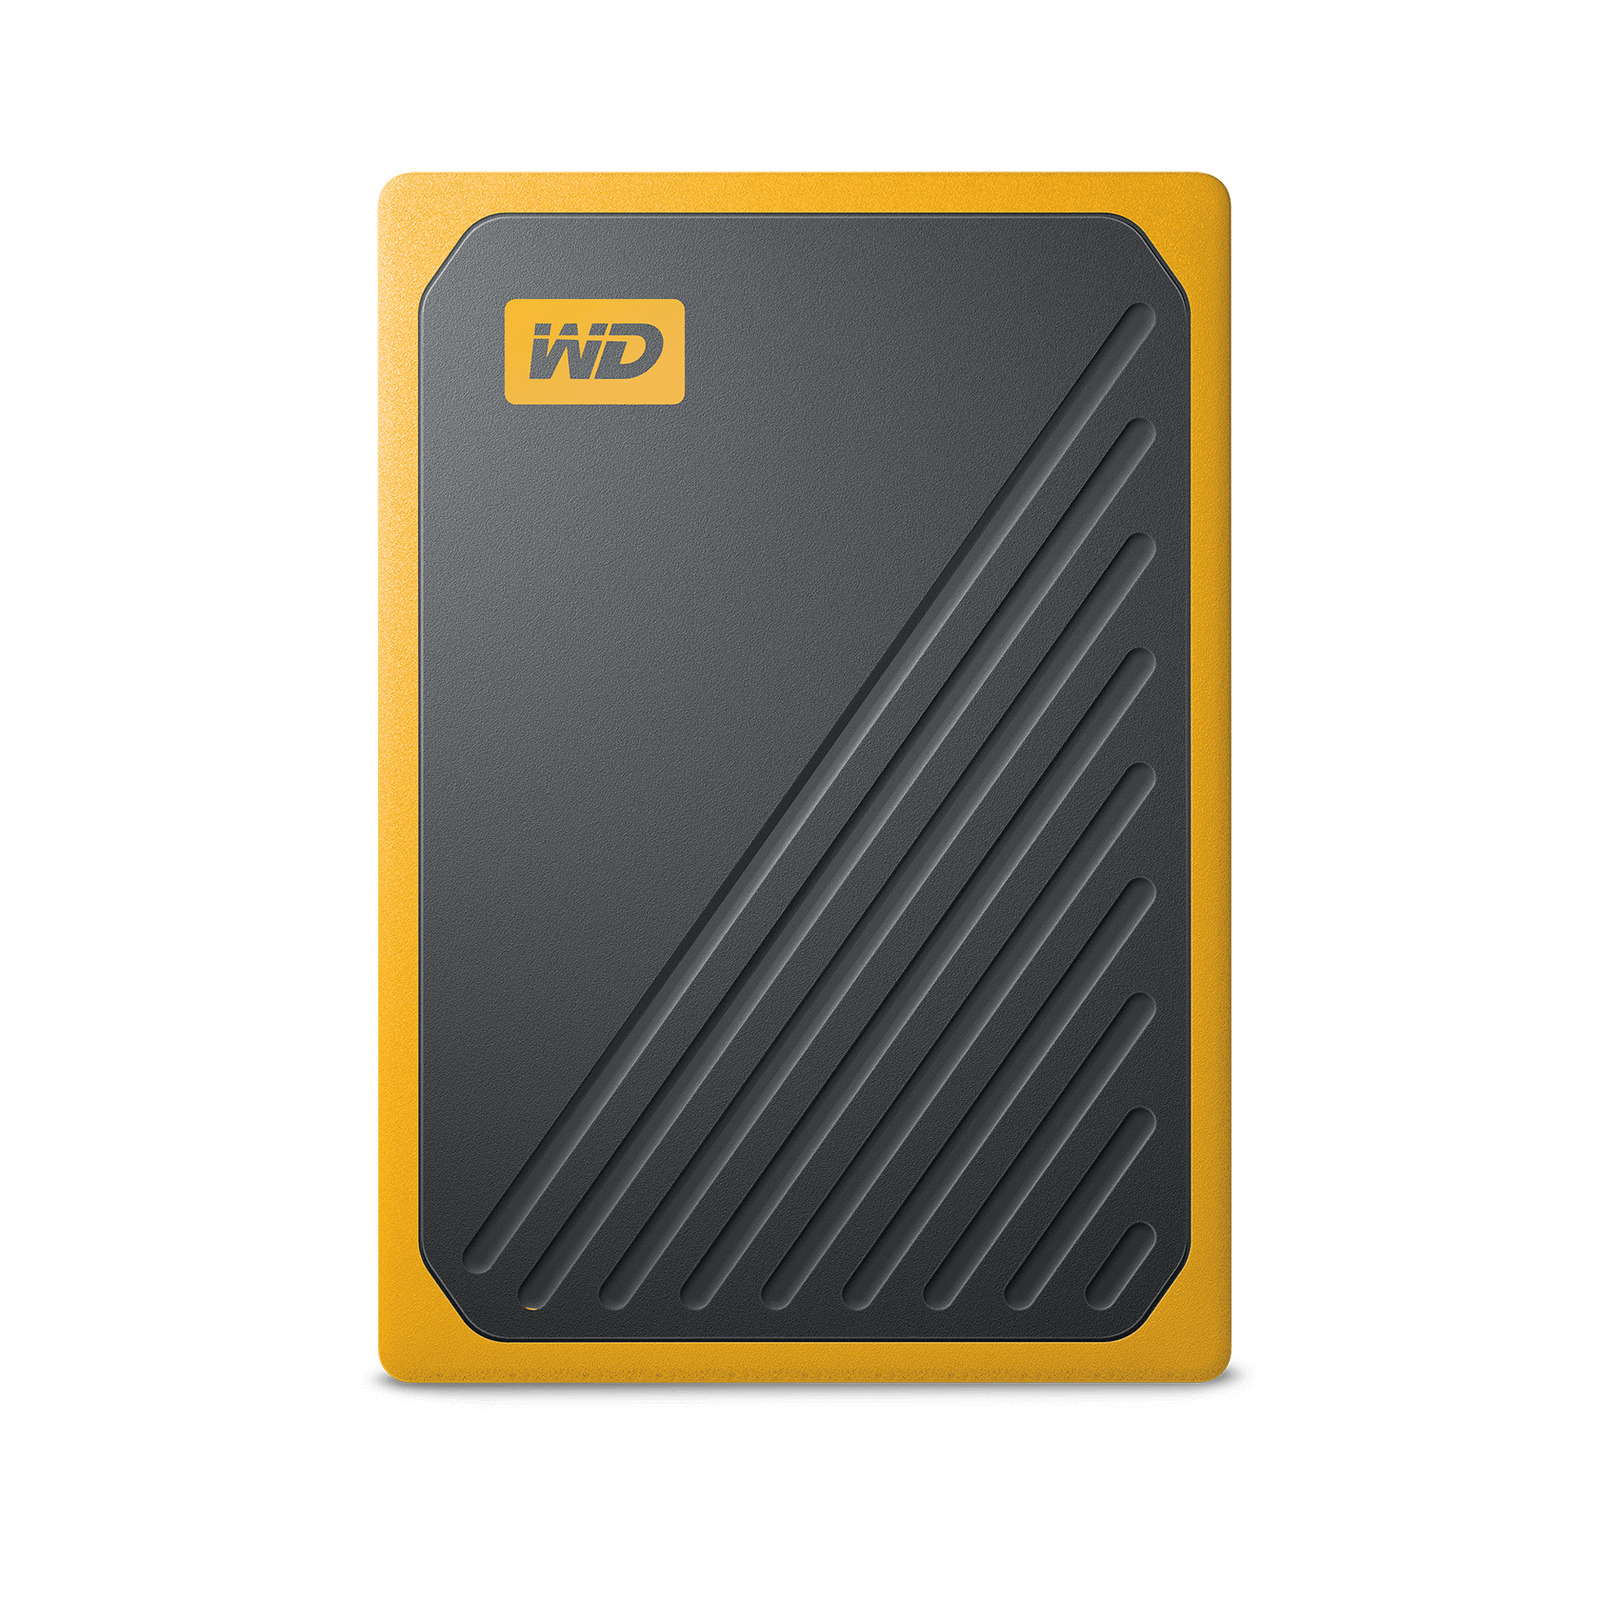 WD 500GB My Passport Go, Portable External Solid State Drive- WDBMCG5000AYT-WESN